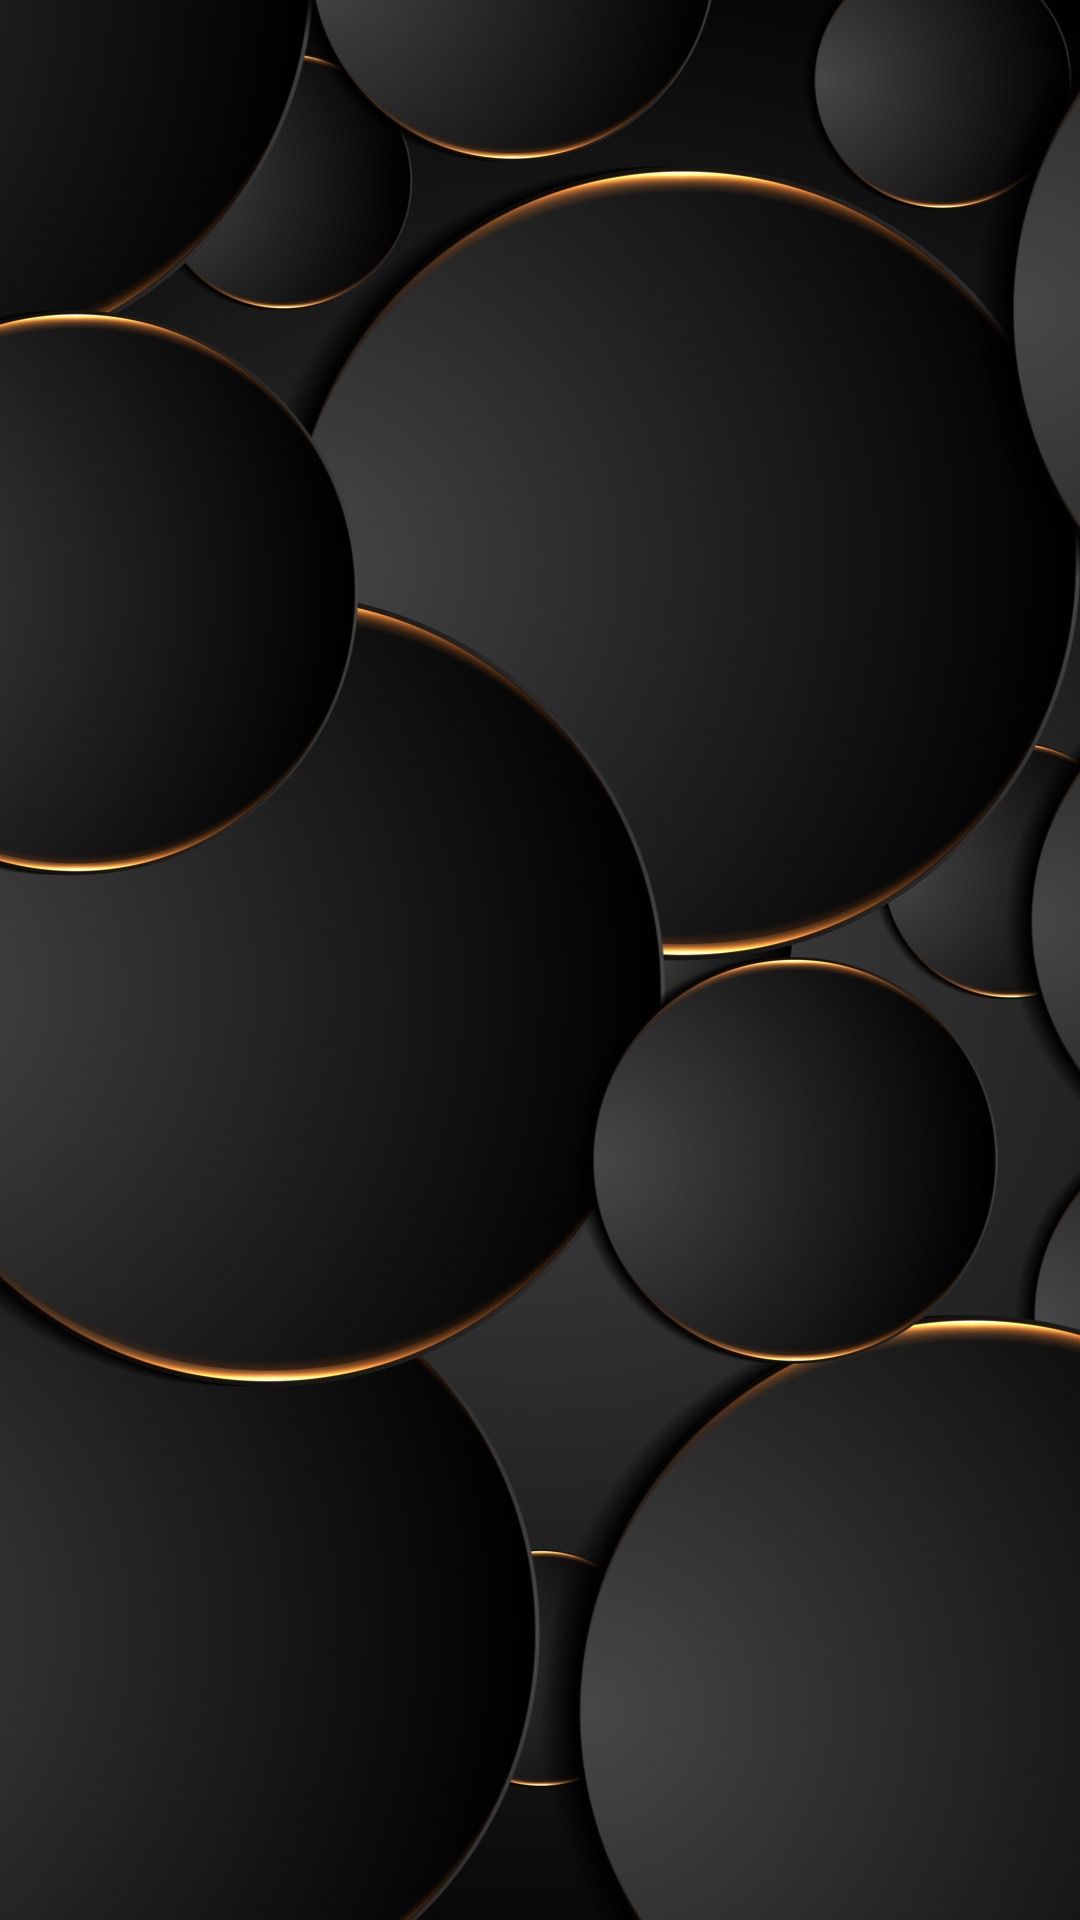 white wallpaper hd for android,black,brown,pattern,circle,design